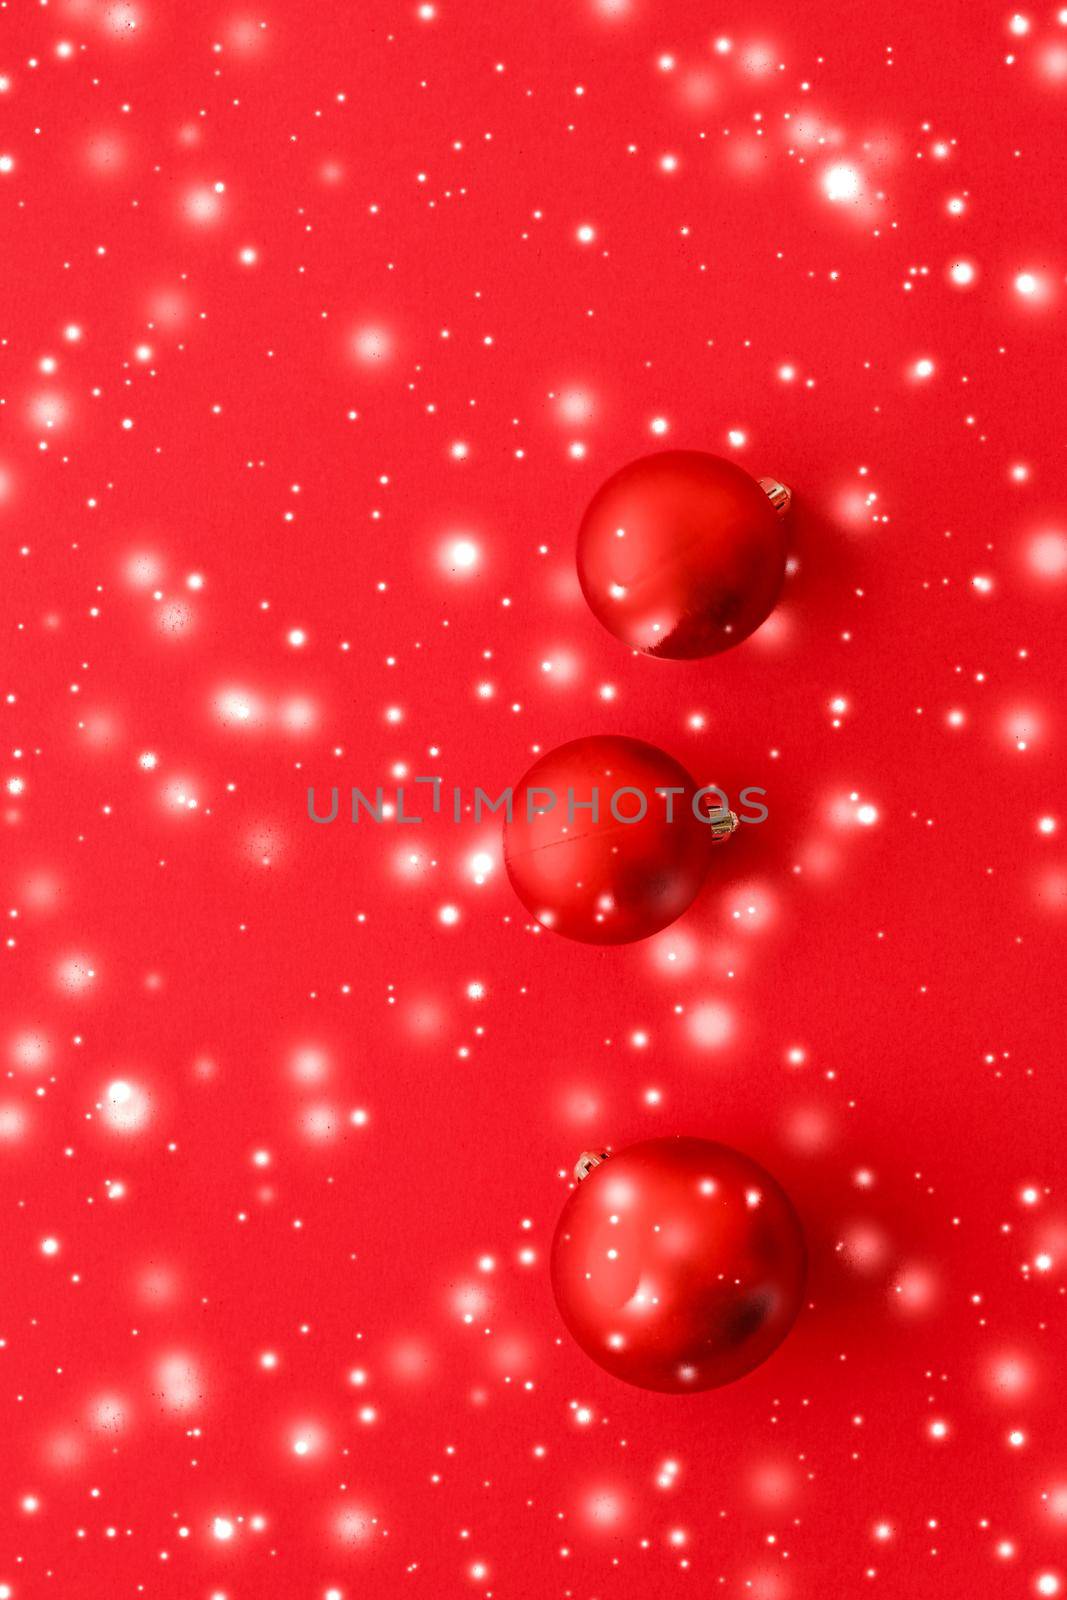 Gift decor, New Years Eve and happy celebration concept - Christmas baubles on red background with snow glitter, luxury winter holiday card